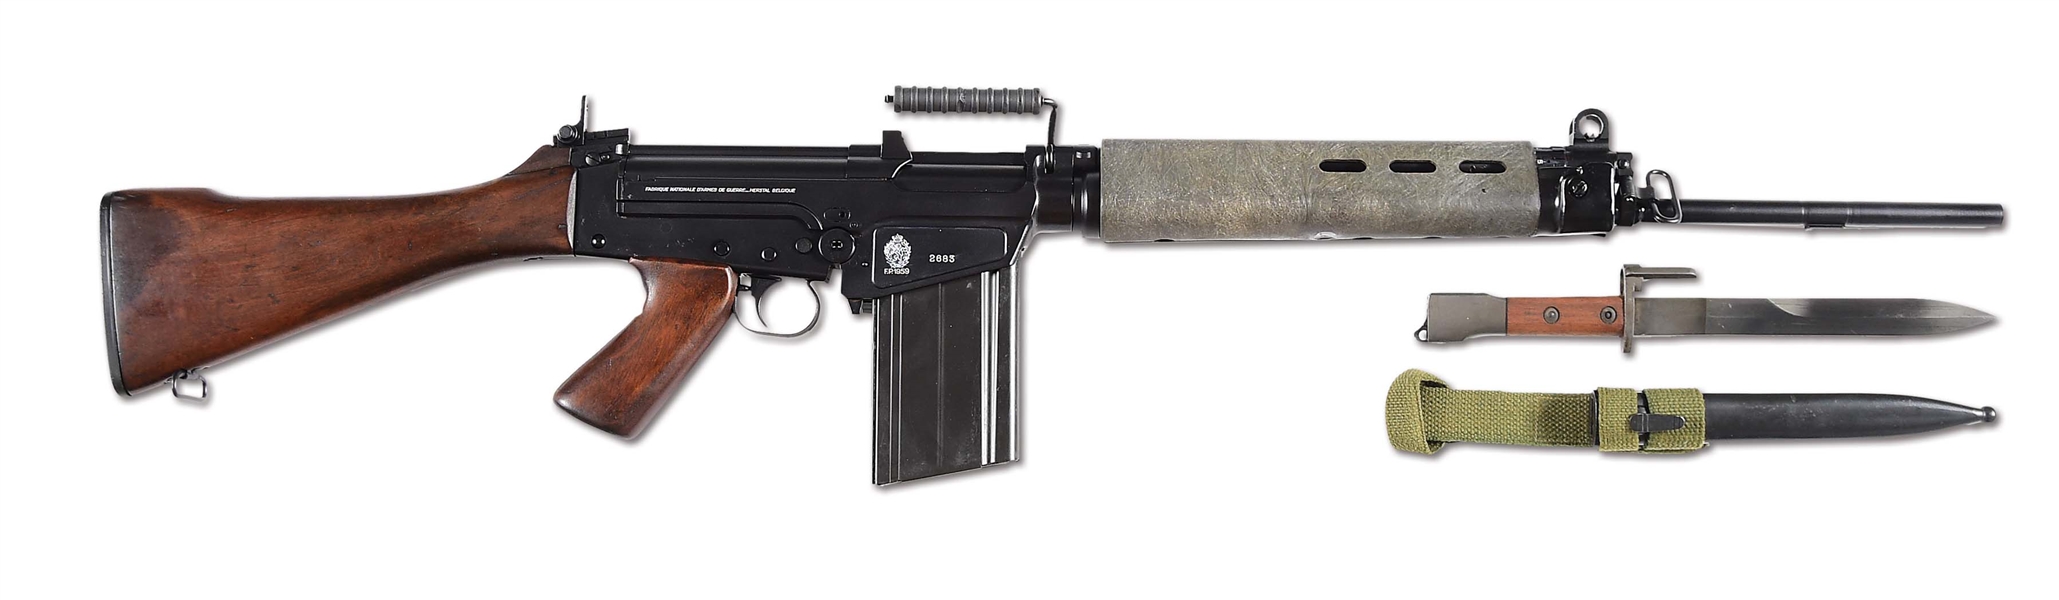 (N) ATTRACTIVE FN HERSTAL FN-FAL MACHINE GUN AS MANUFACTURED FOR THE CONGO (CURIO AND RELIC).